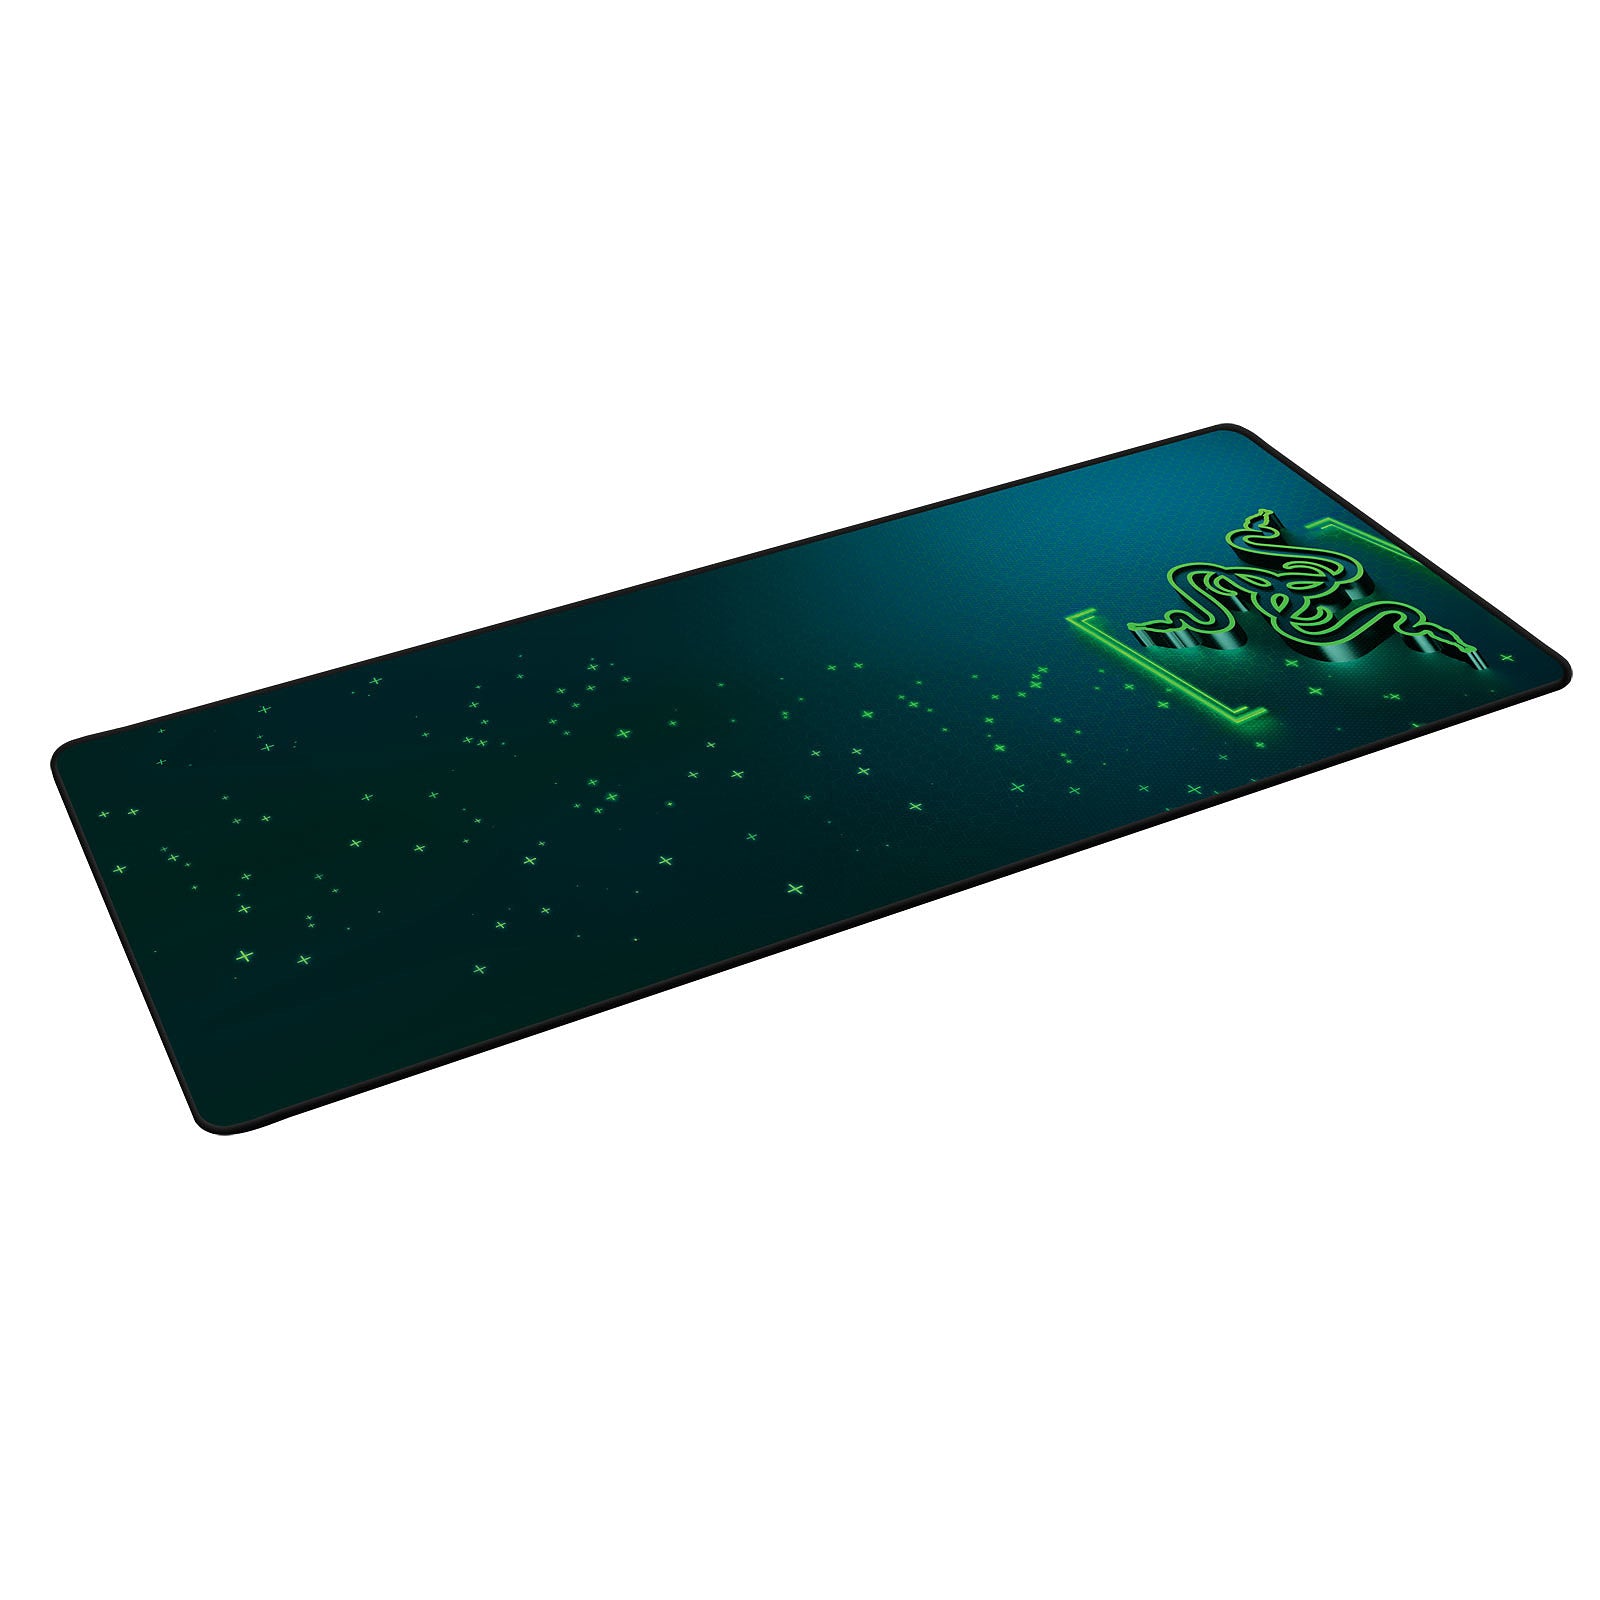 Razer Goliathus Control (Extended) Gaming Mouse Pad: Medium Friction Mat - Anti-Slip Rubber Base - Portable Cloth Design - Anti-Fraying Stitched Frame - Gravity